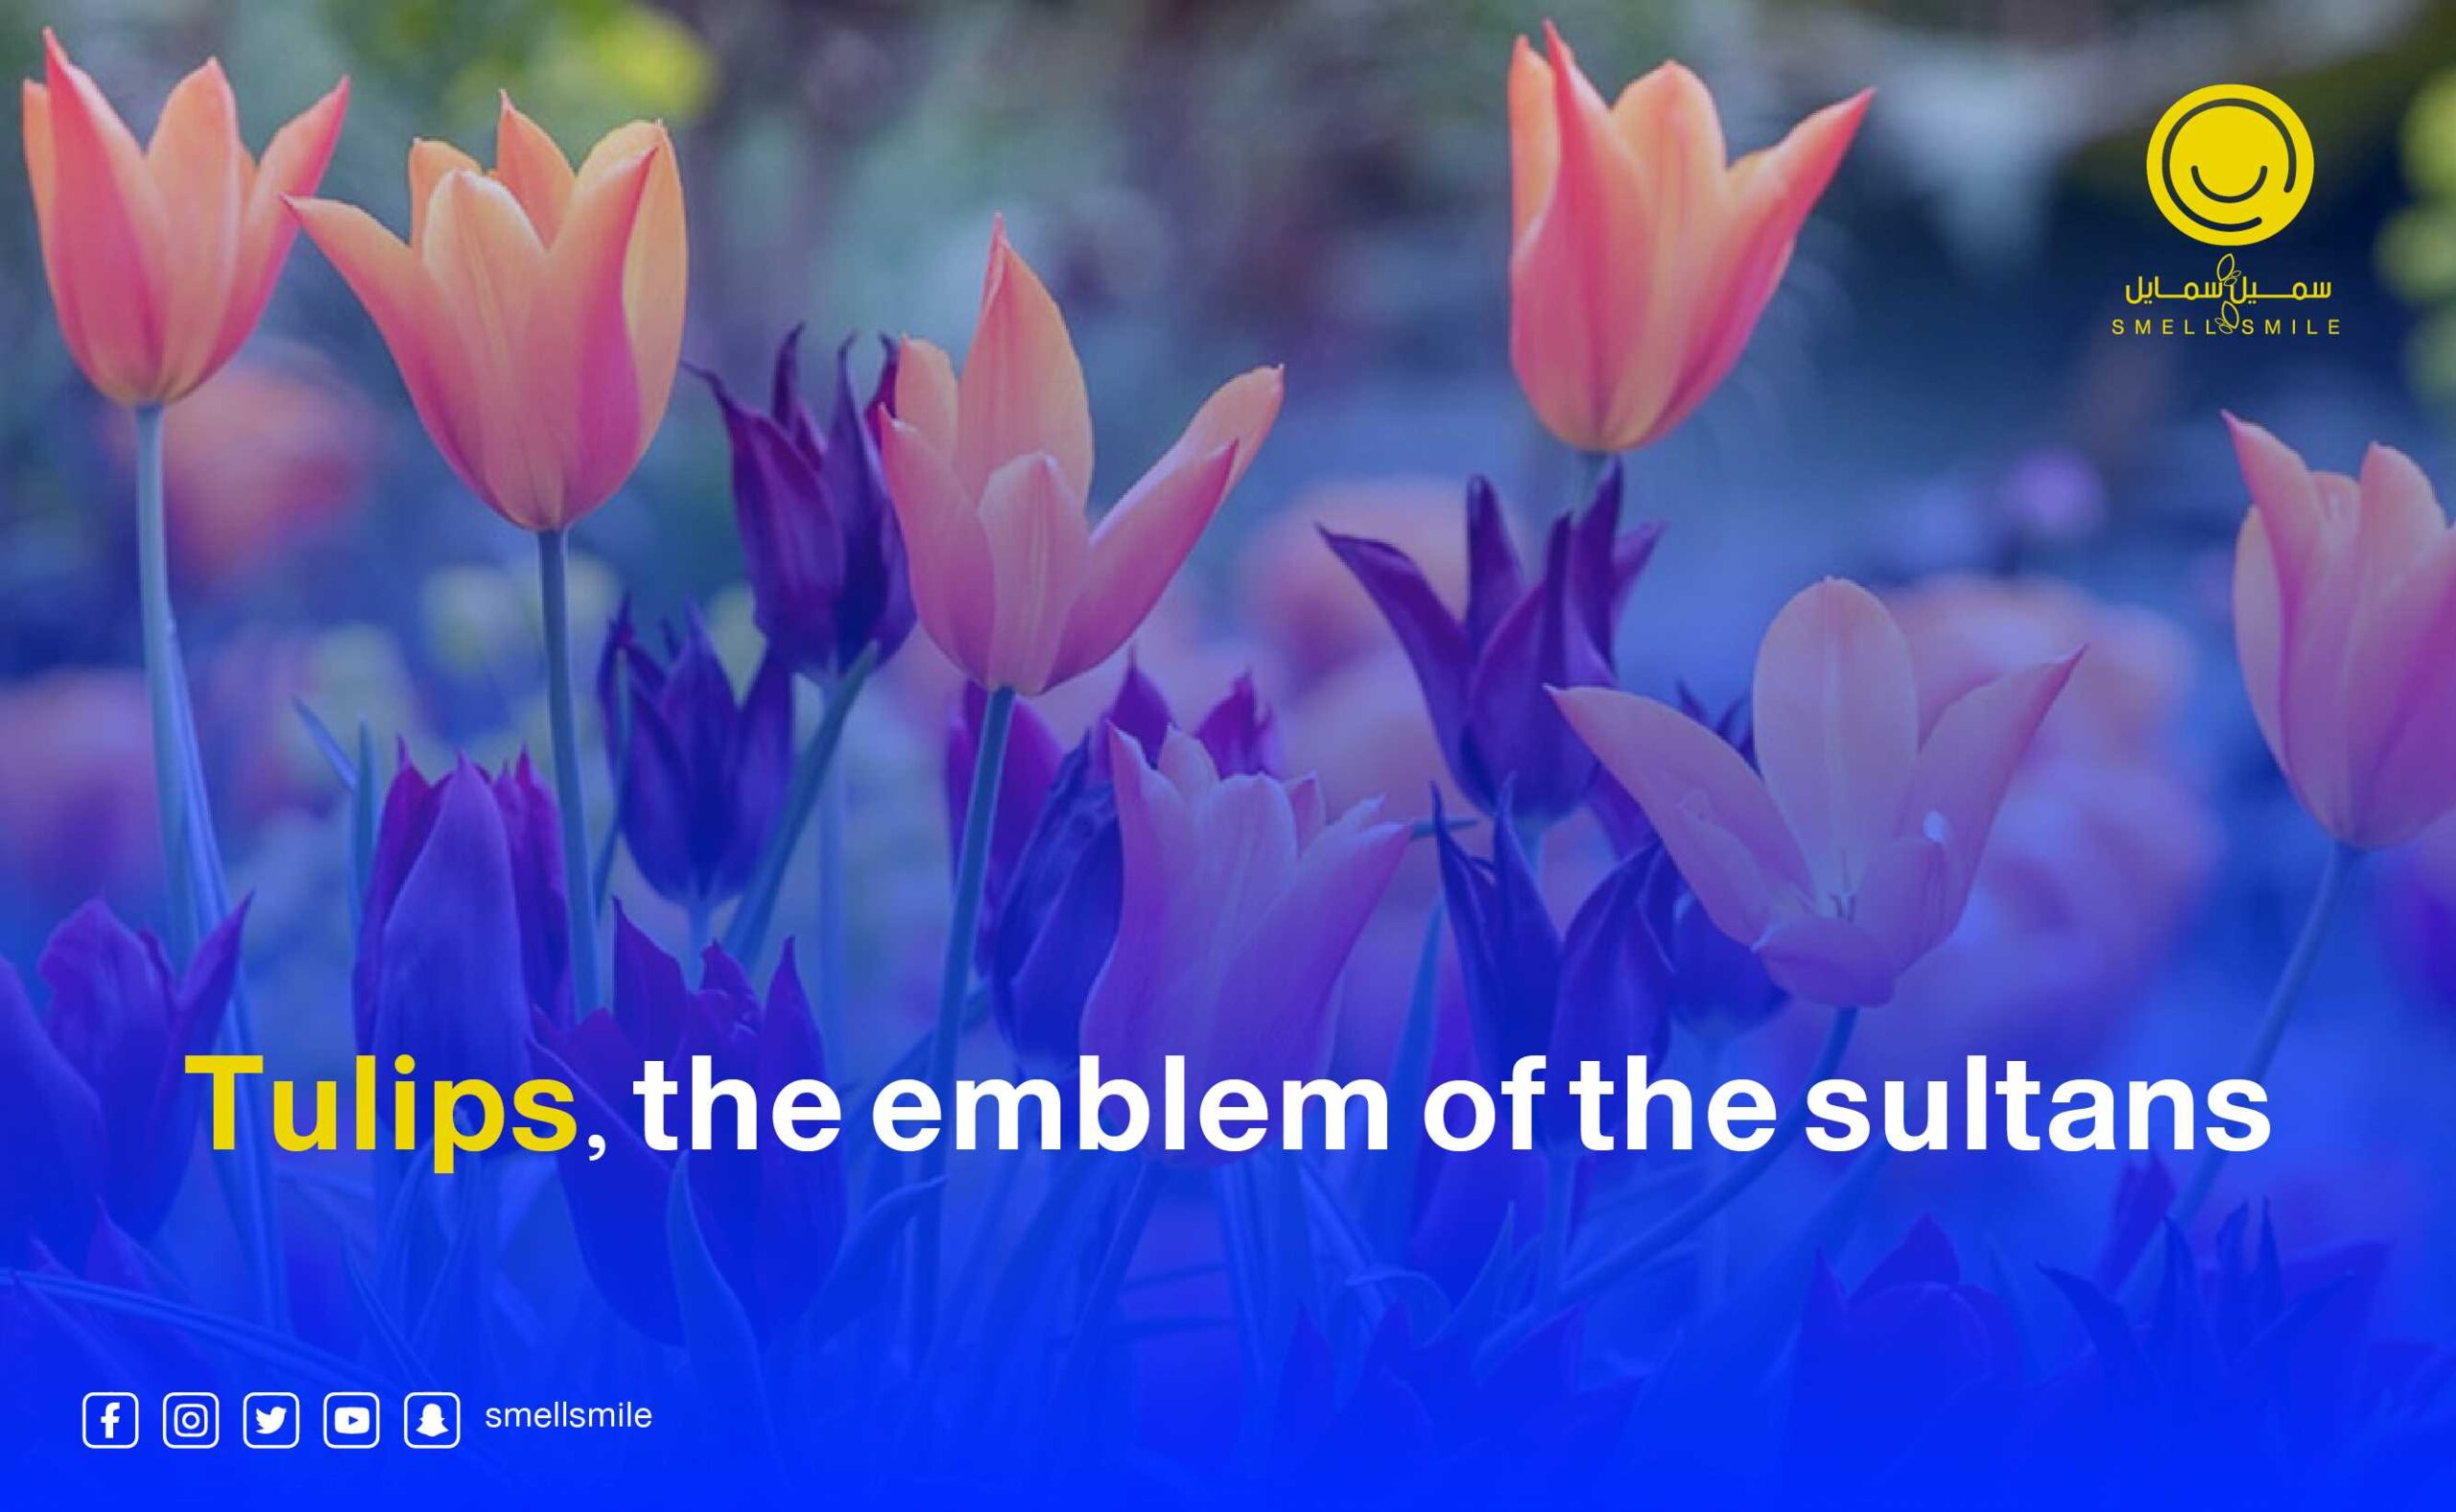 Tulips, the emblem of the sultans